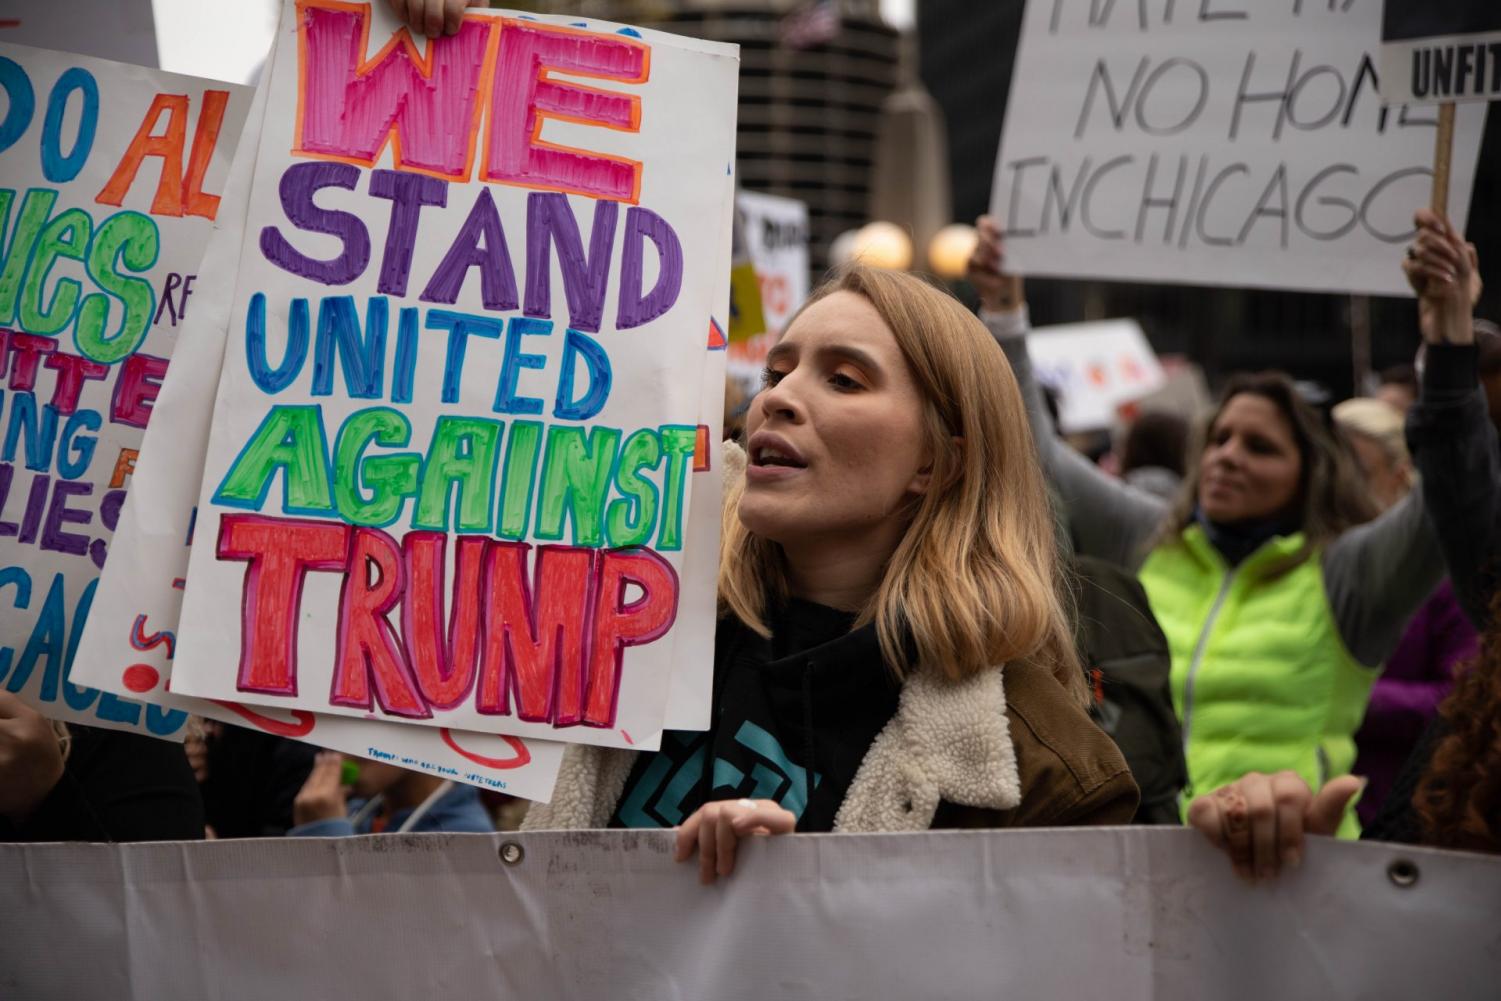 Thousands+protest+during+Trumps+visit+to+Chicago